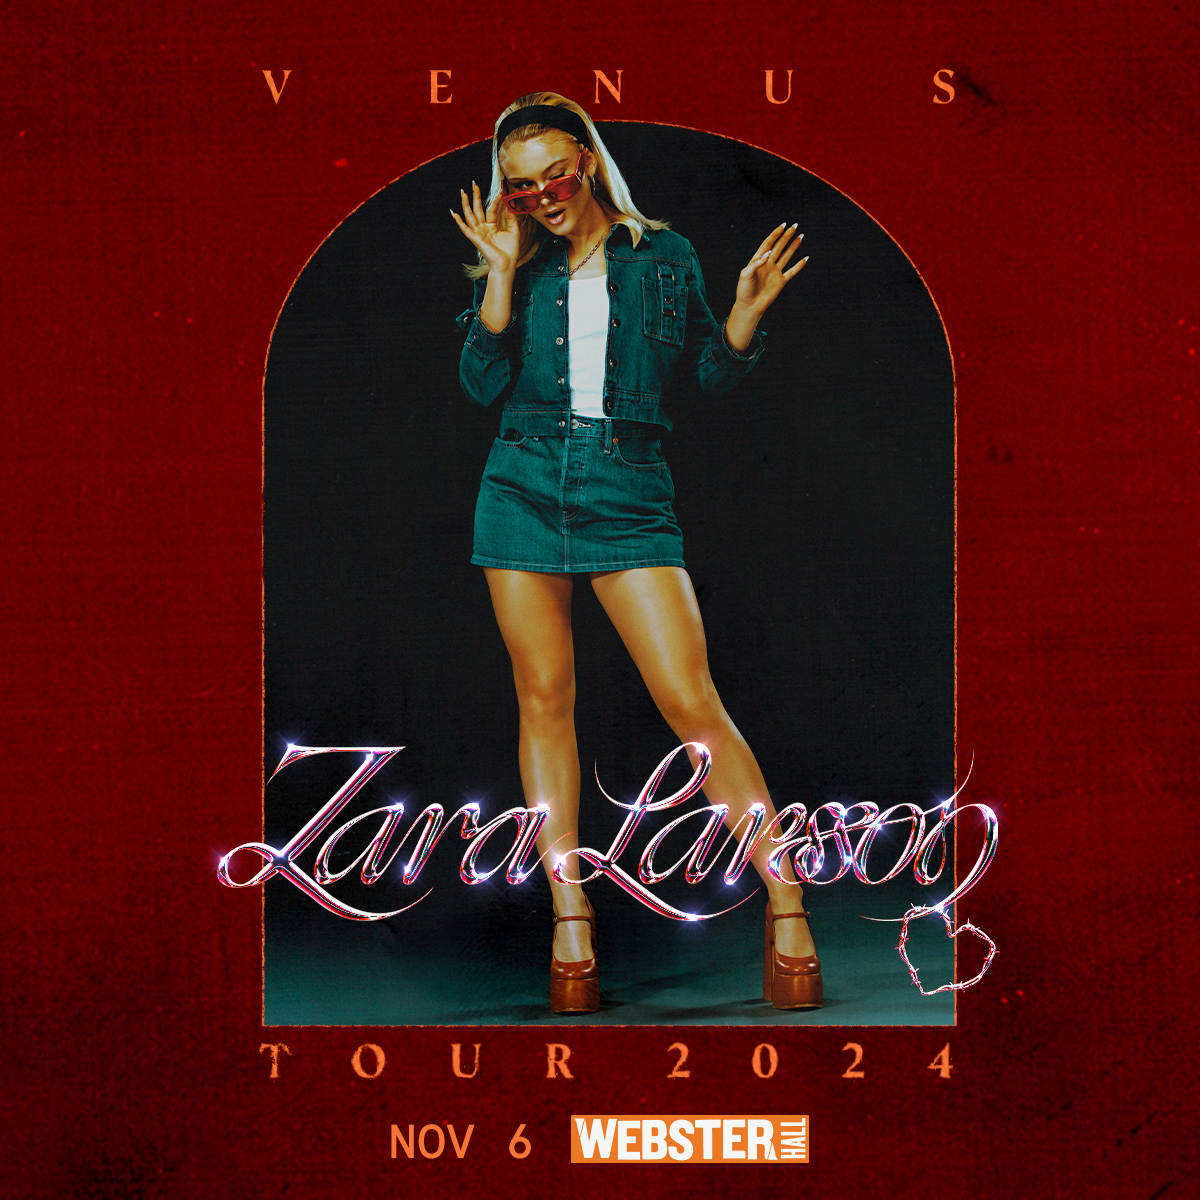 JUST ANNOUNCED: Zara Larsson is heading to the east village on nov 6 💕 tickets go on sale friday at 10am